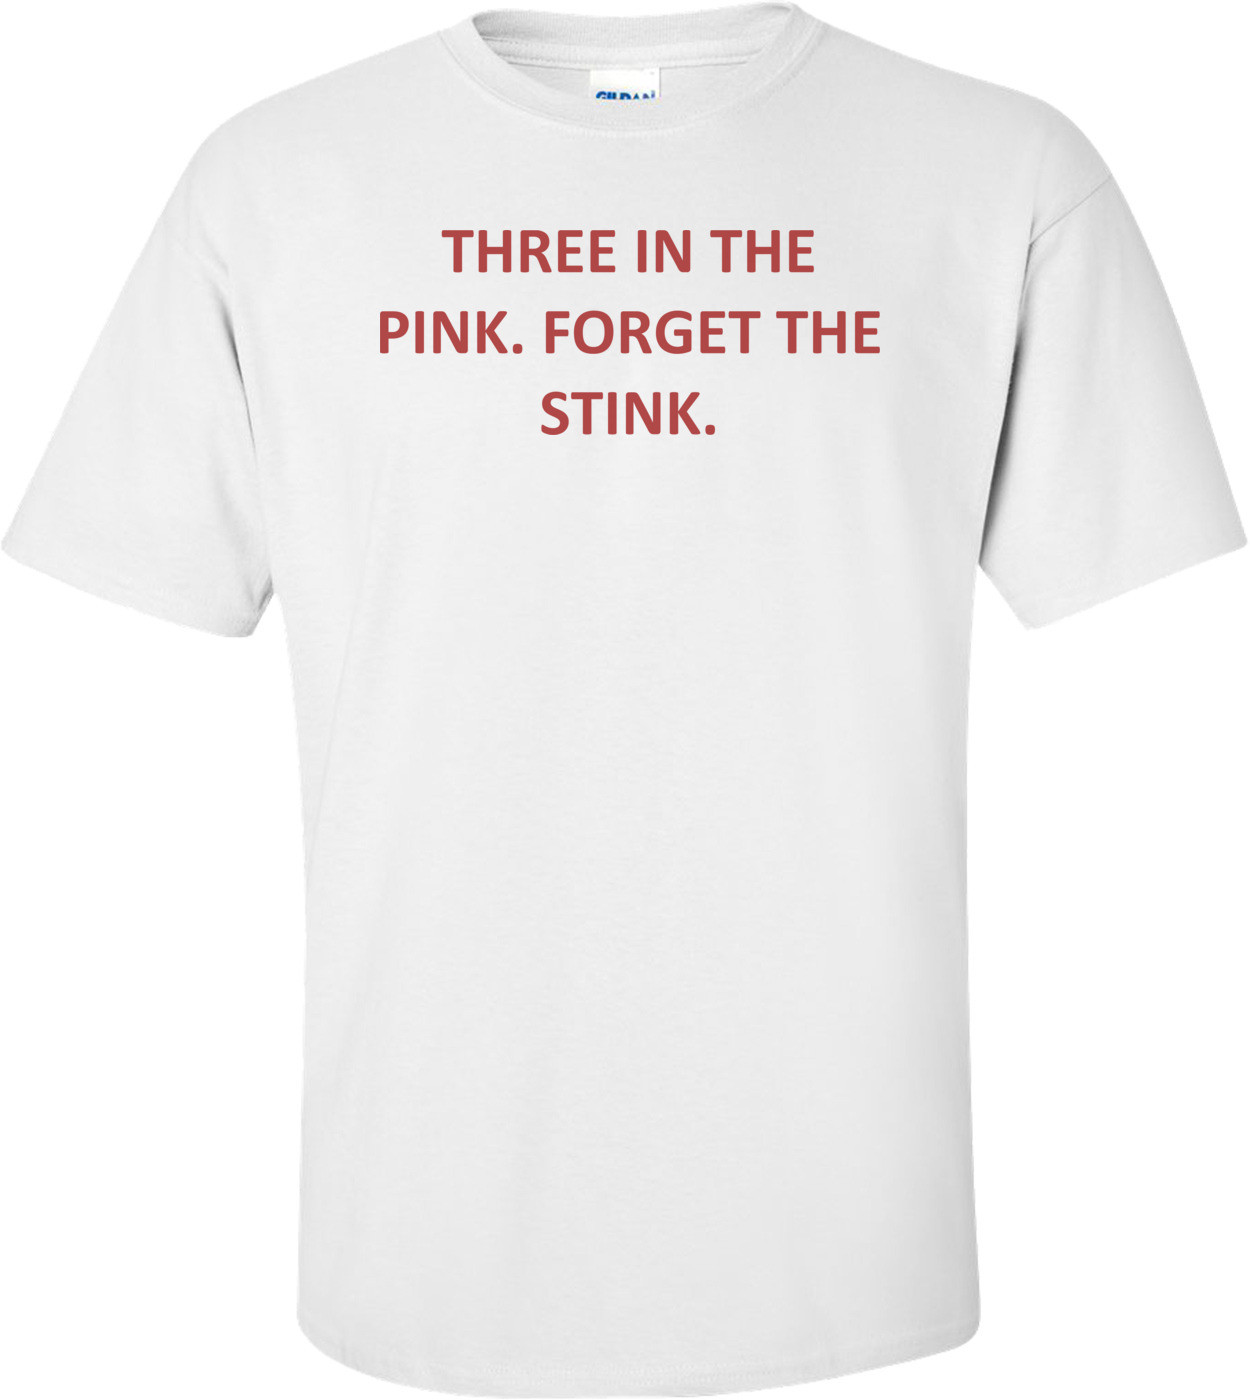 THREE IN THE PINK. FORGET THE STINK. Shirt